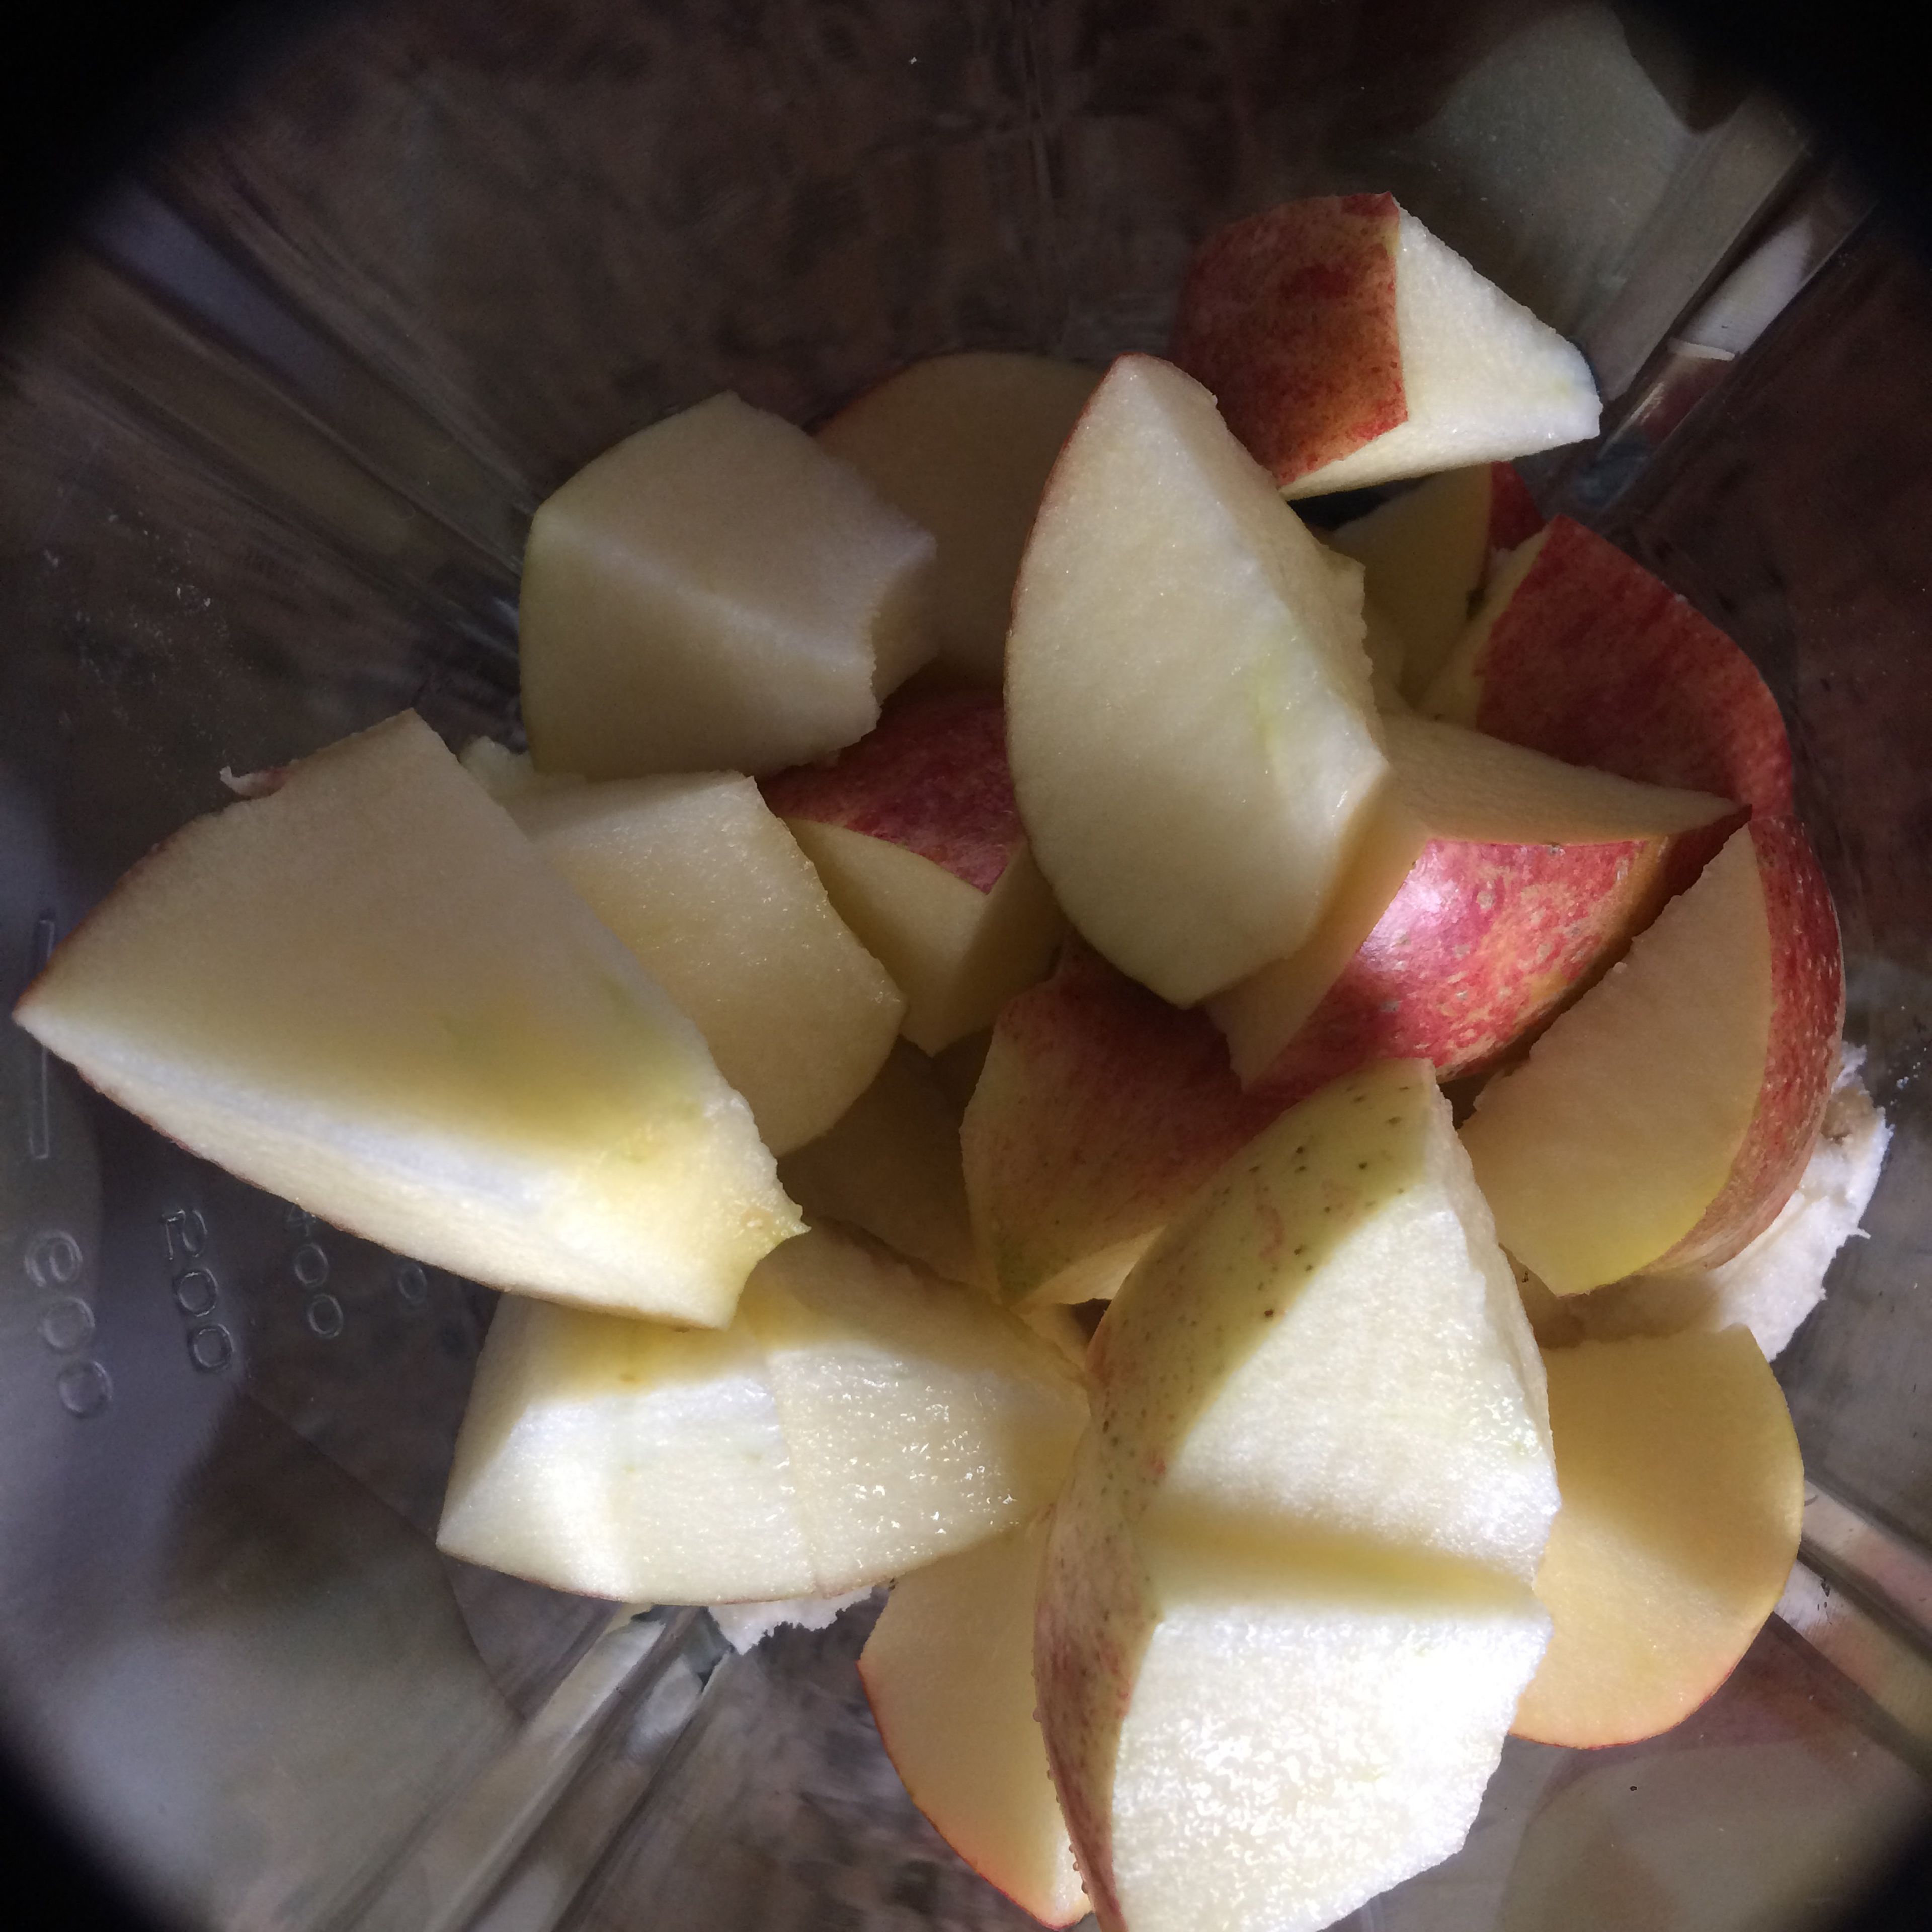 Apple cutted into small pieces